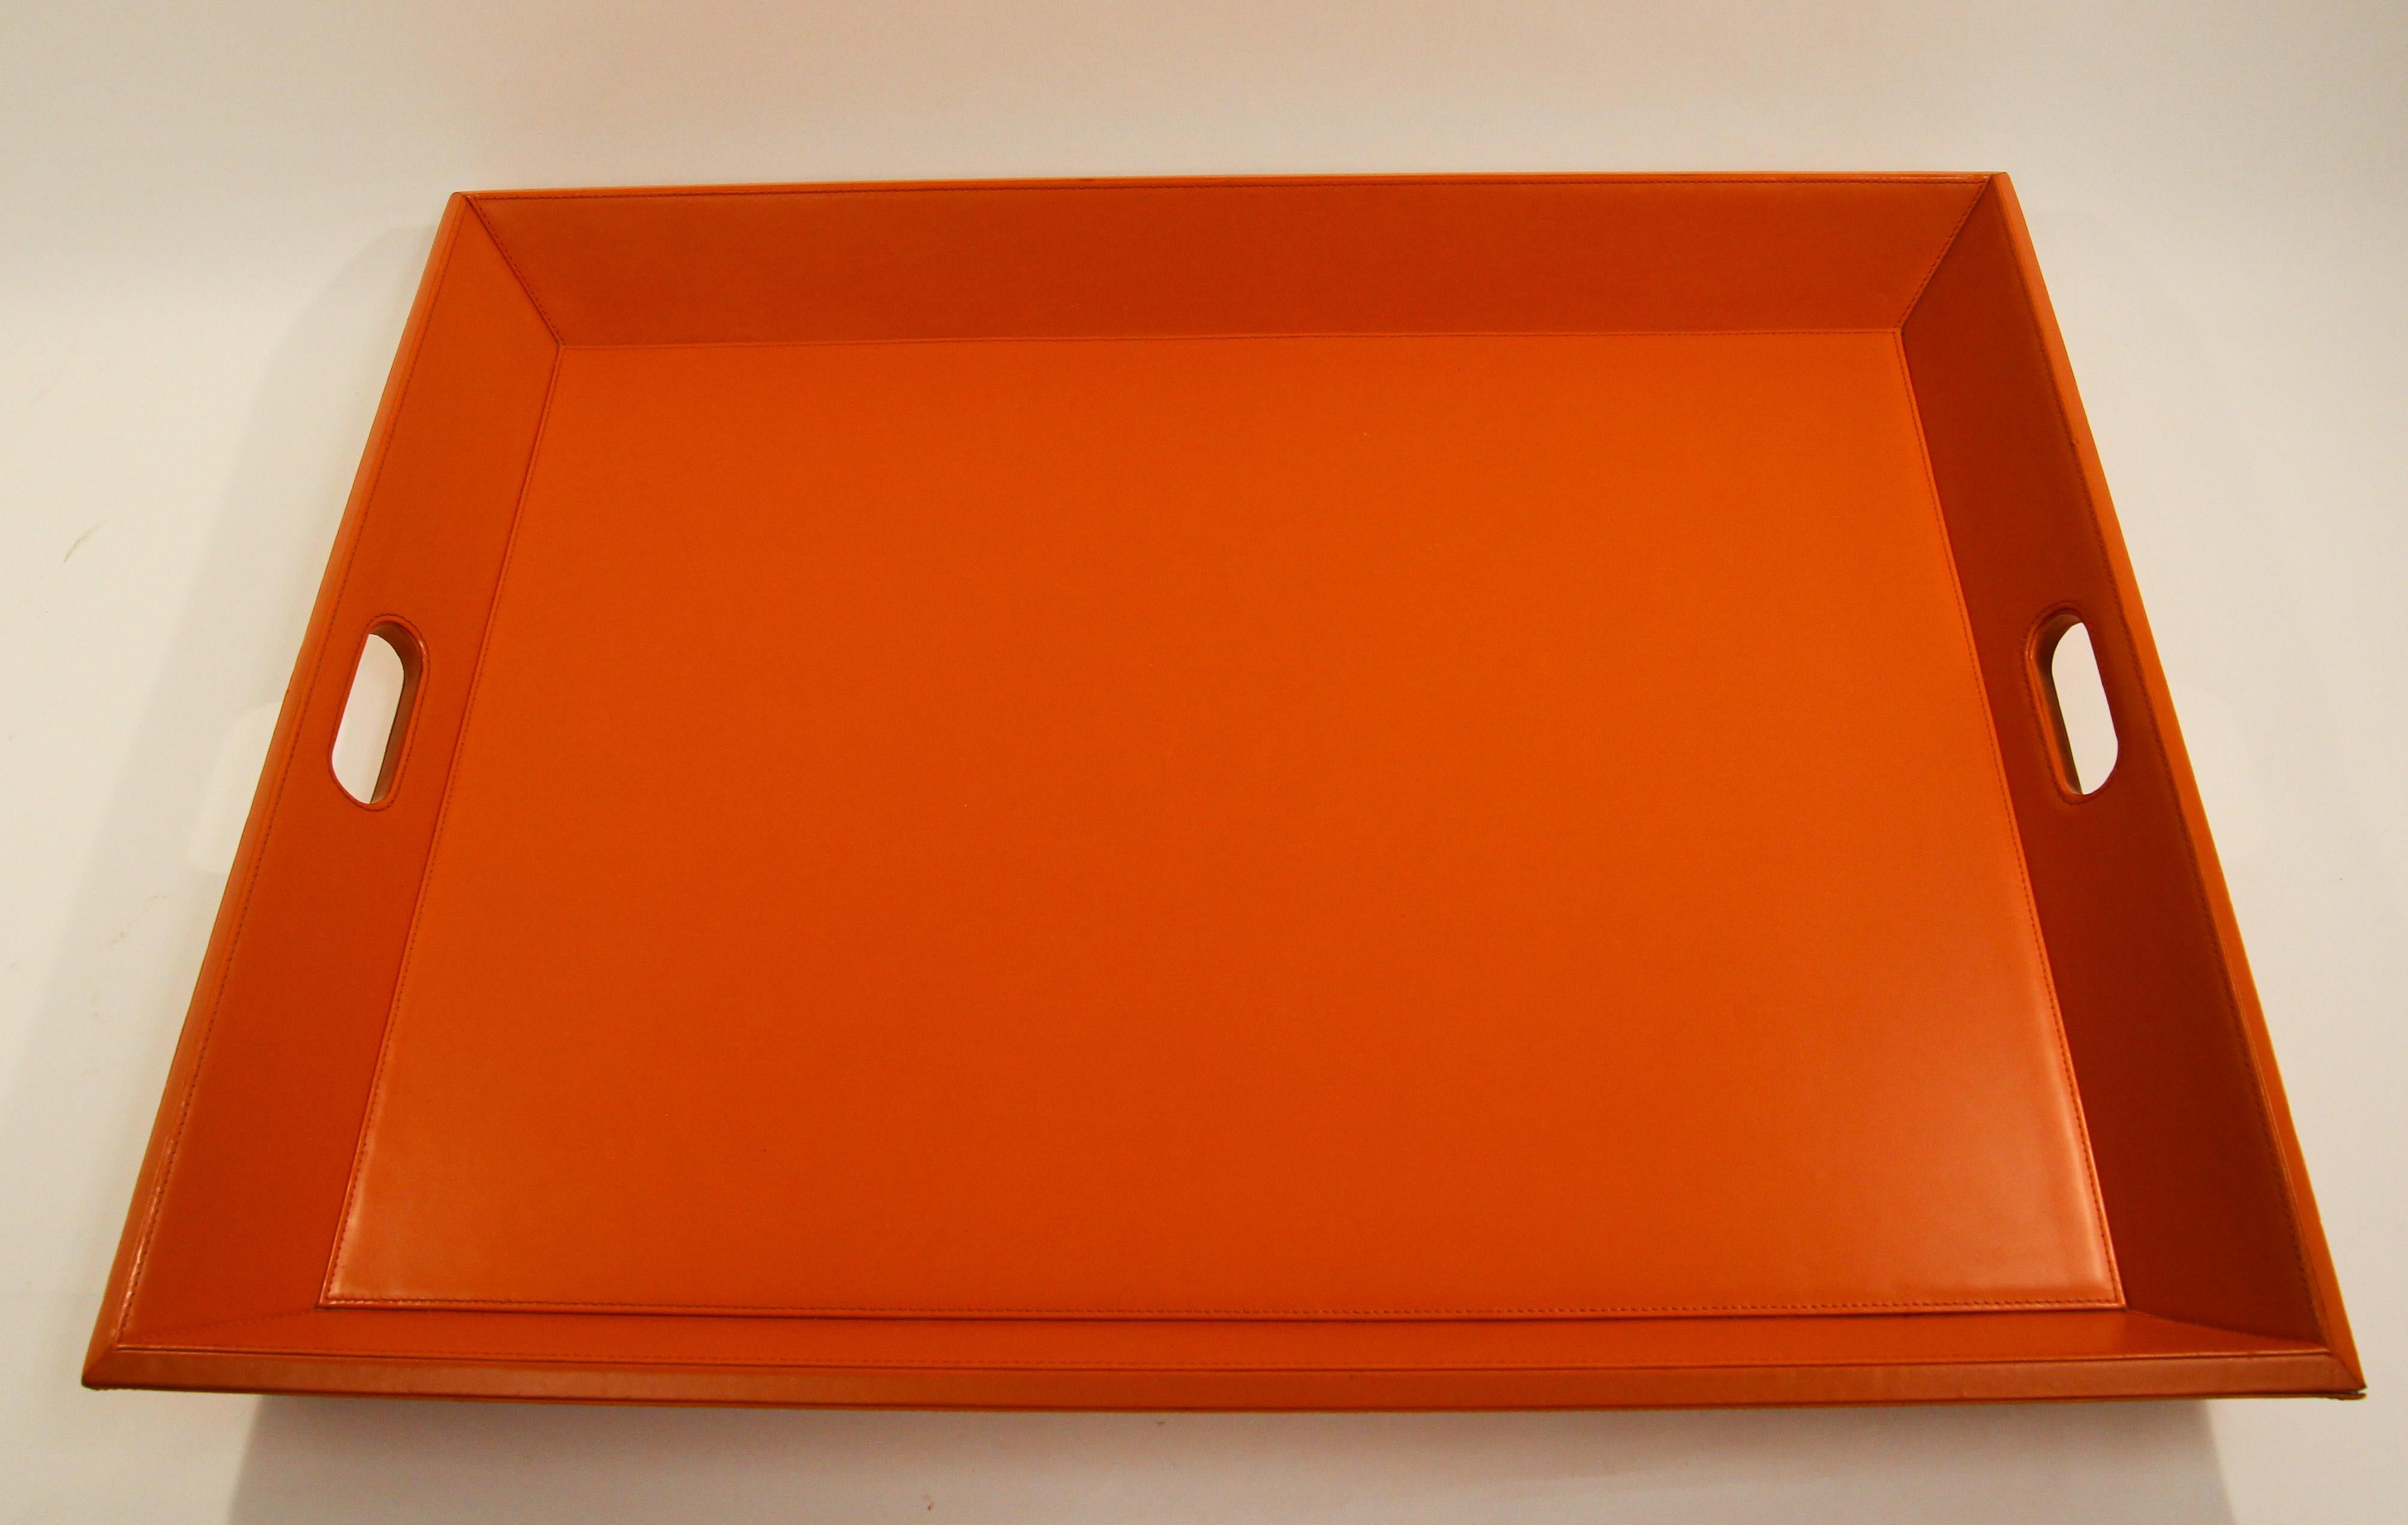 Large Vintage Orange Tray with Handles by Williams Sonoma Home 6